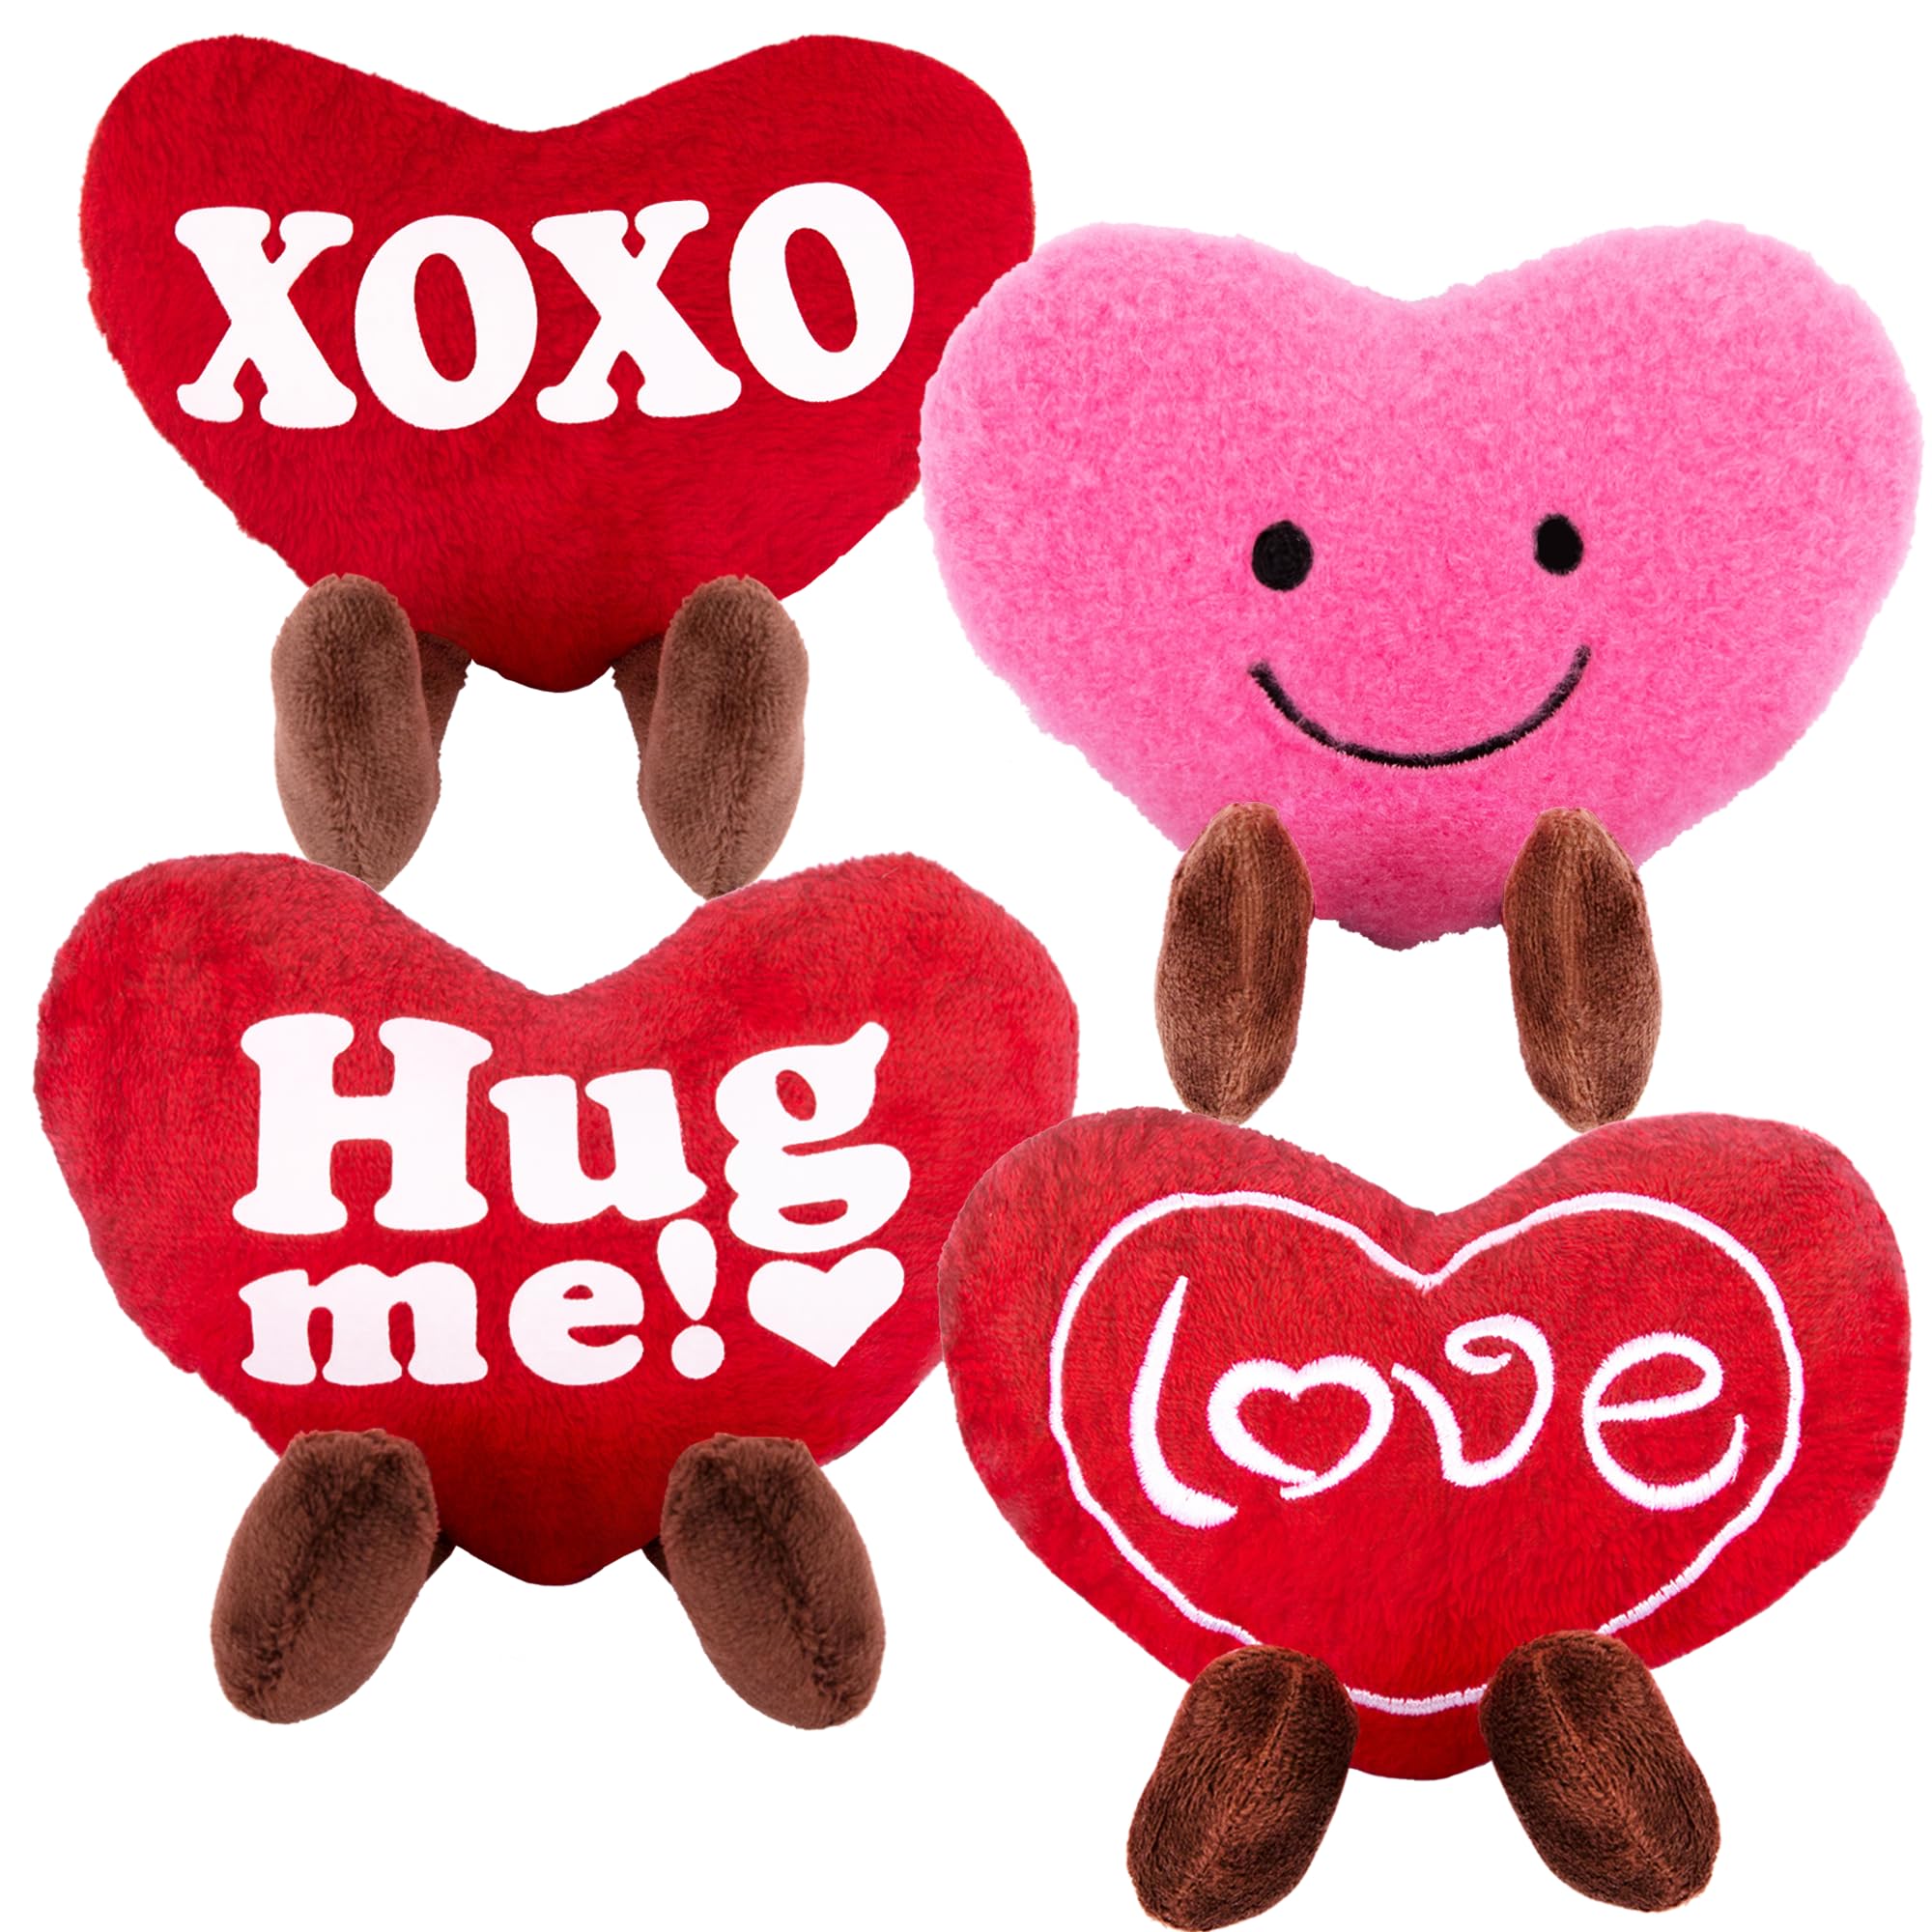 Set of 4 Small Valentines Plush Hearts - Cute Love Heart Plush Toys in Assorted Designs - Stuffed Love Heart Toy Set